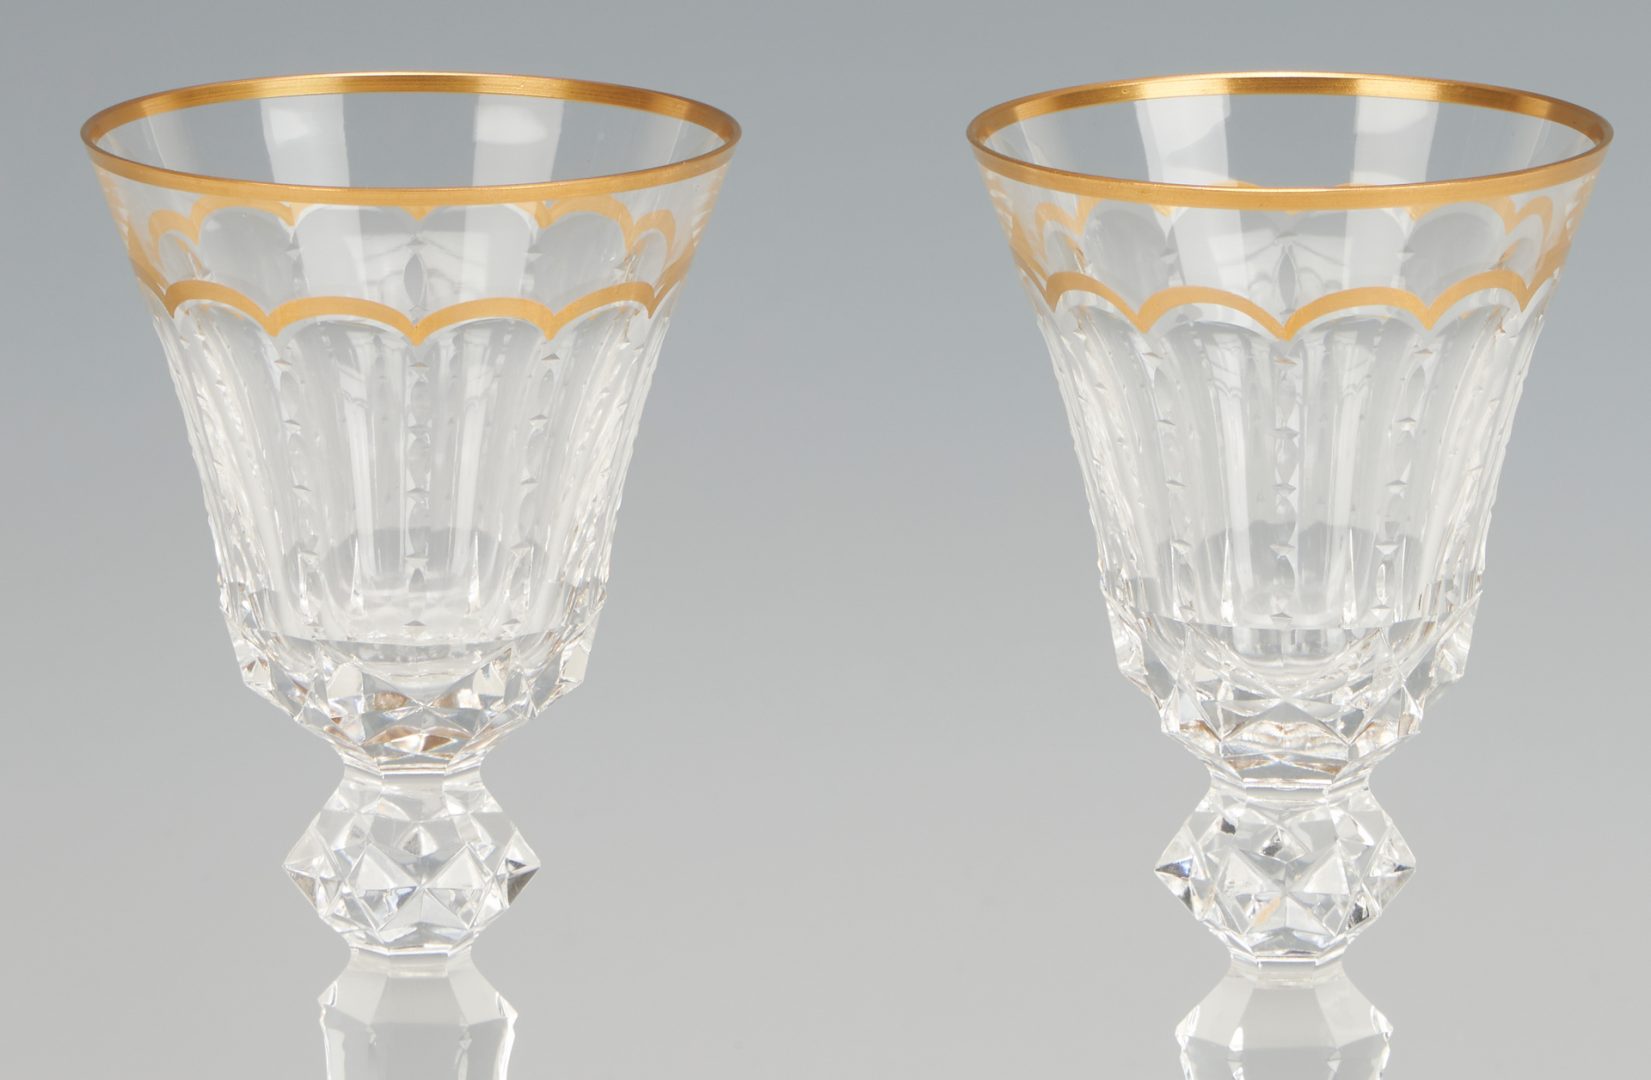 Lot 202: 14 St. Louis Excellence Crystal Burgundy Wine Glass